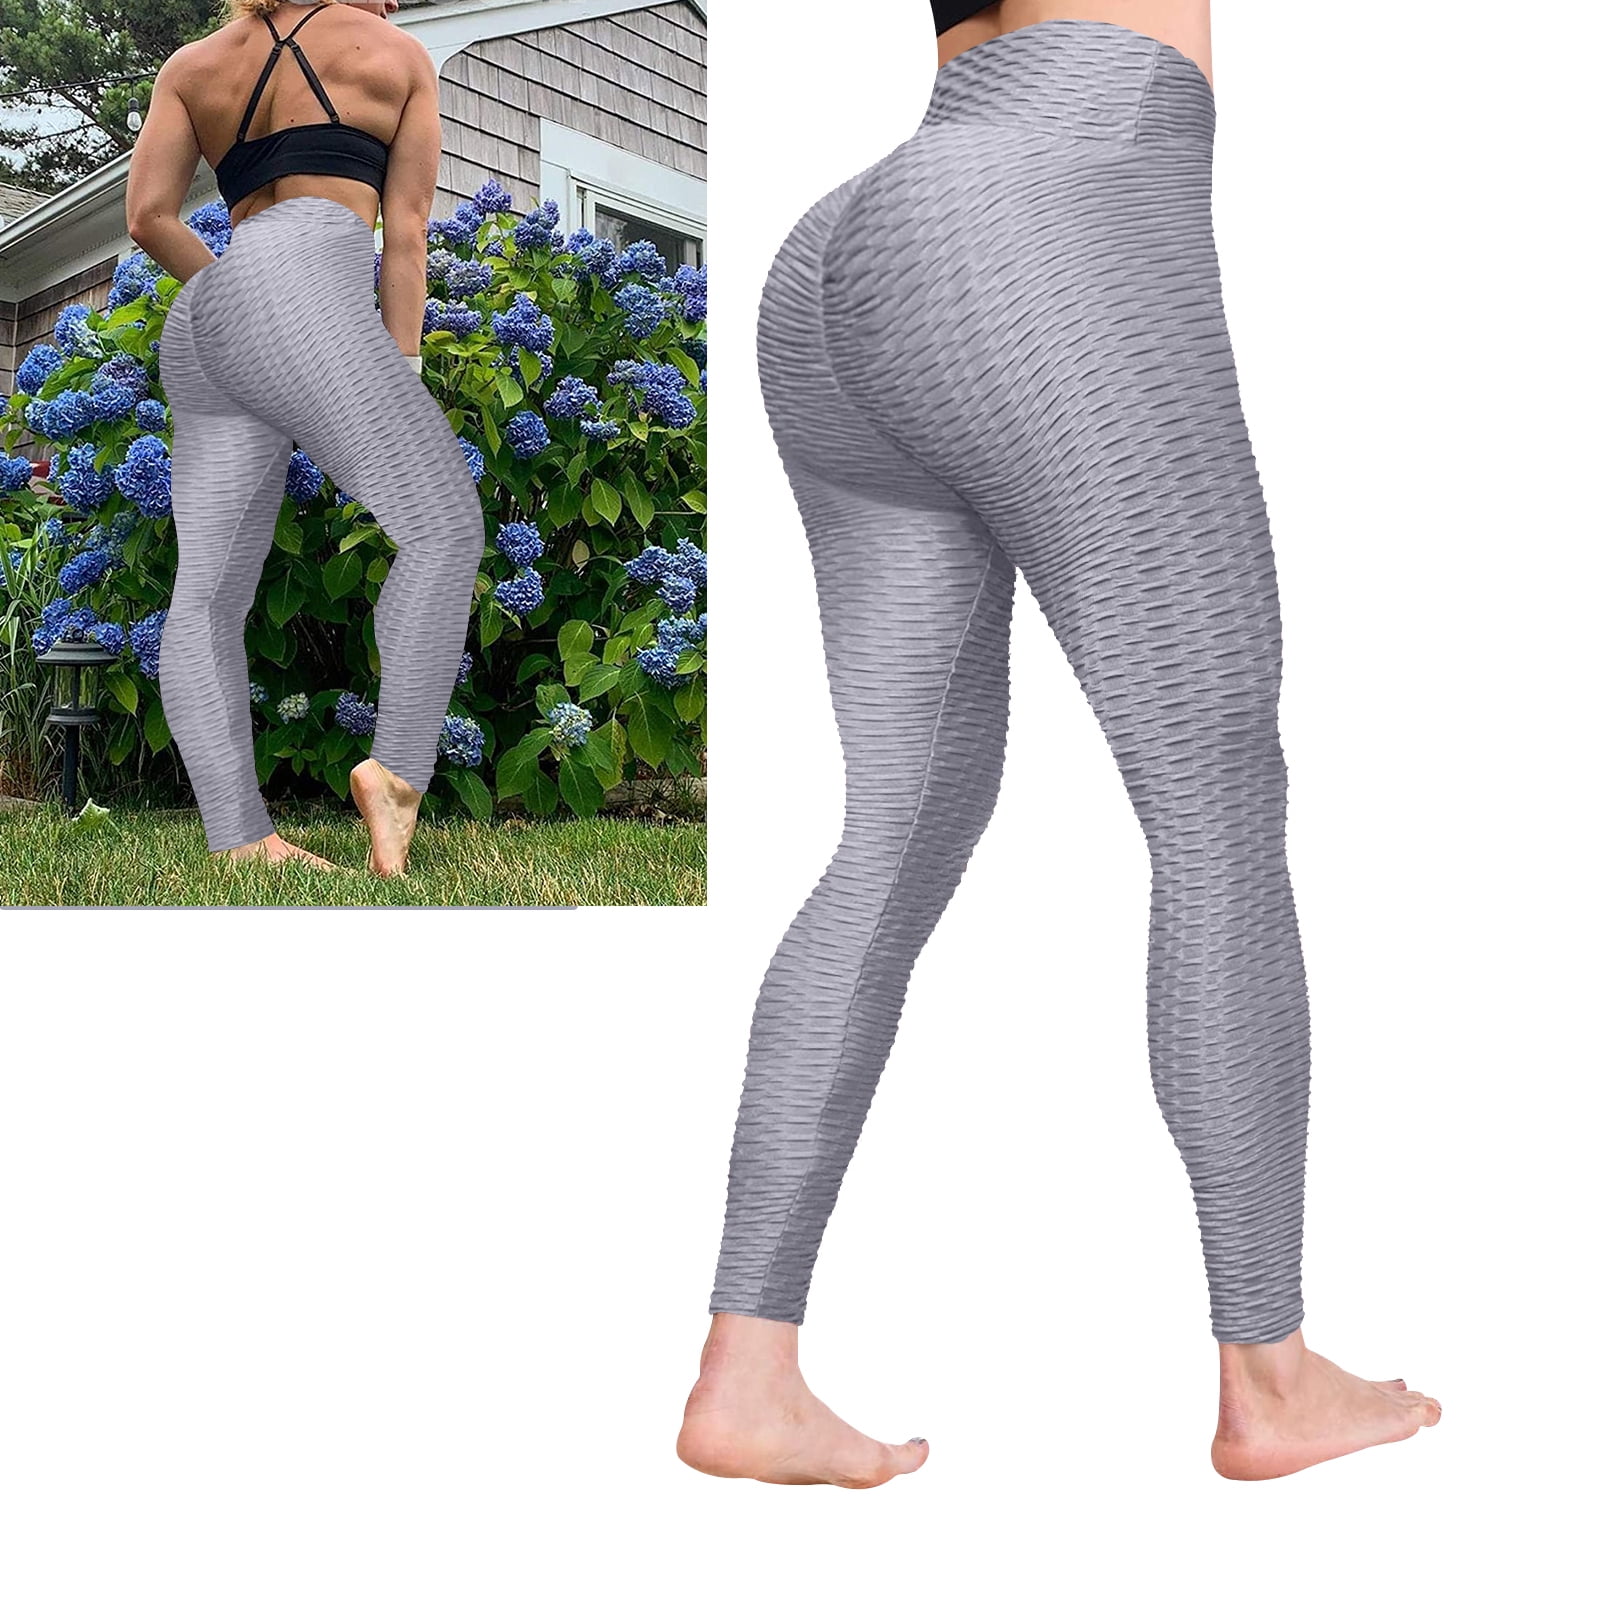 Women's leggings, sexy, high waist, yoga pants, booty scrunch, tummy control,  for: workout, running, elastic sports pants price in UAE,  UAE